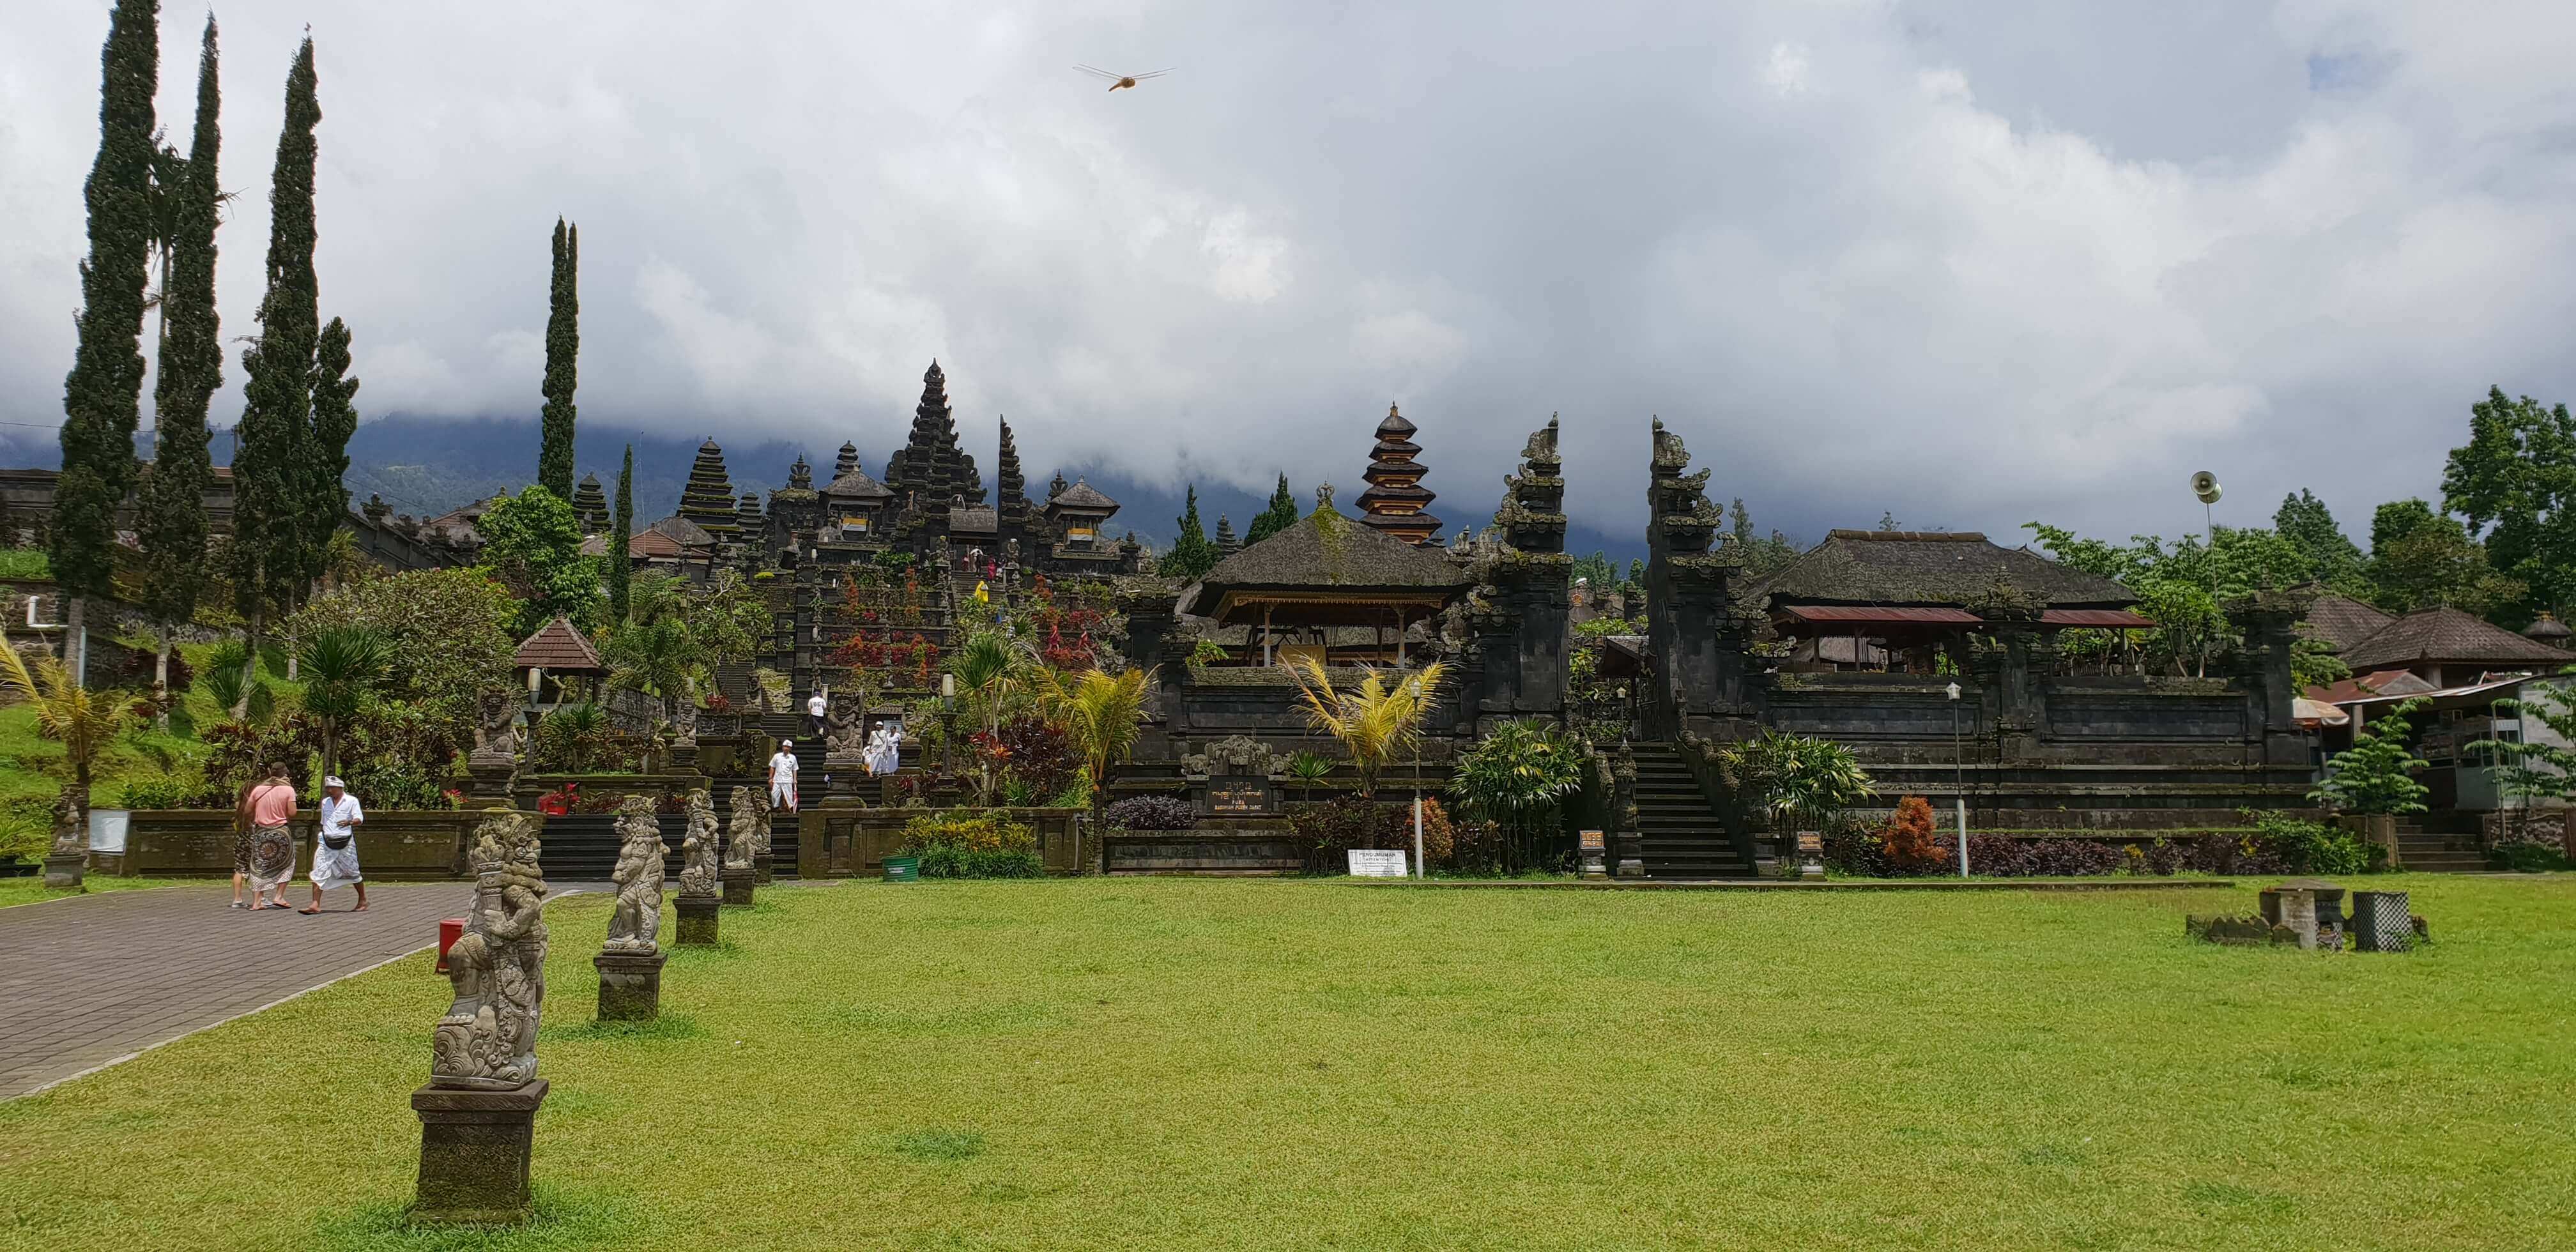 The Besakih Temple is the biggest of all the temples included in the Ubud itinerary, and the holiest Hindu temple in Bali